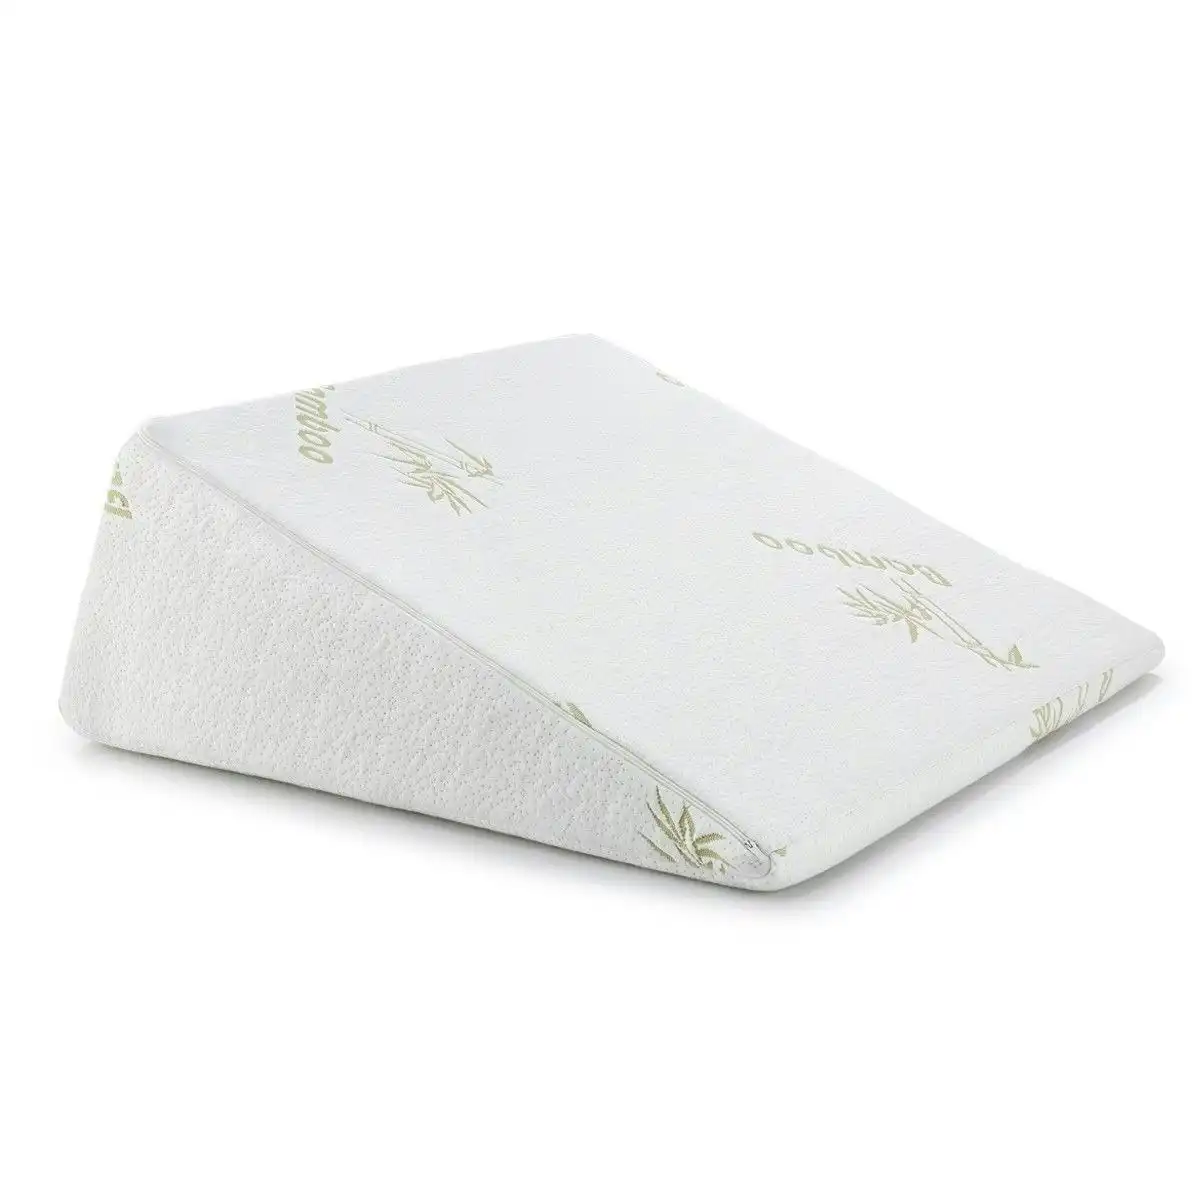 Luxdream Triangle Bed Wedge Pillow with Memory Foam Topper